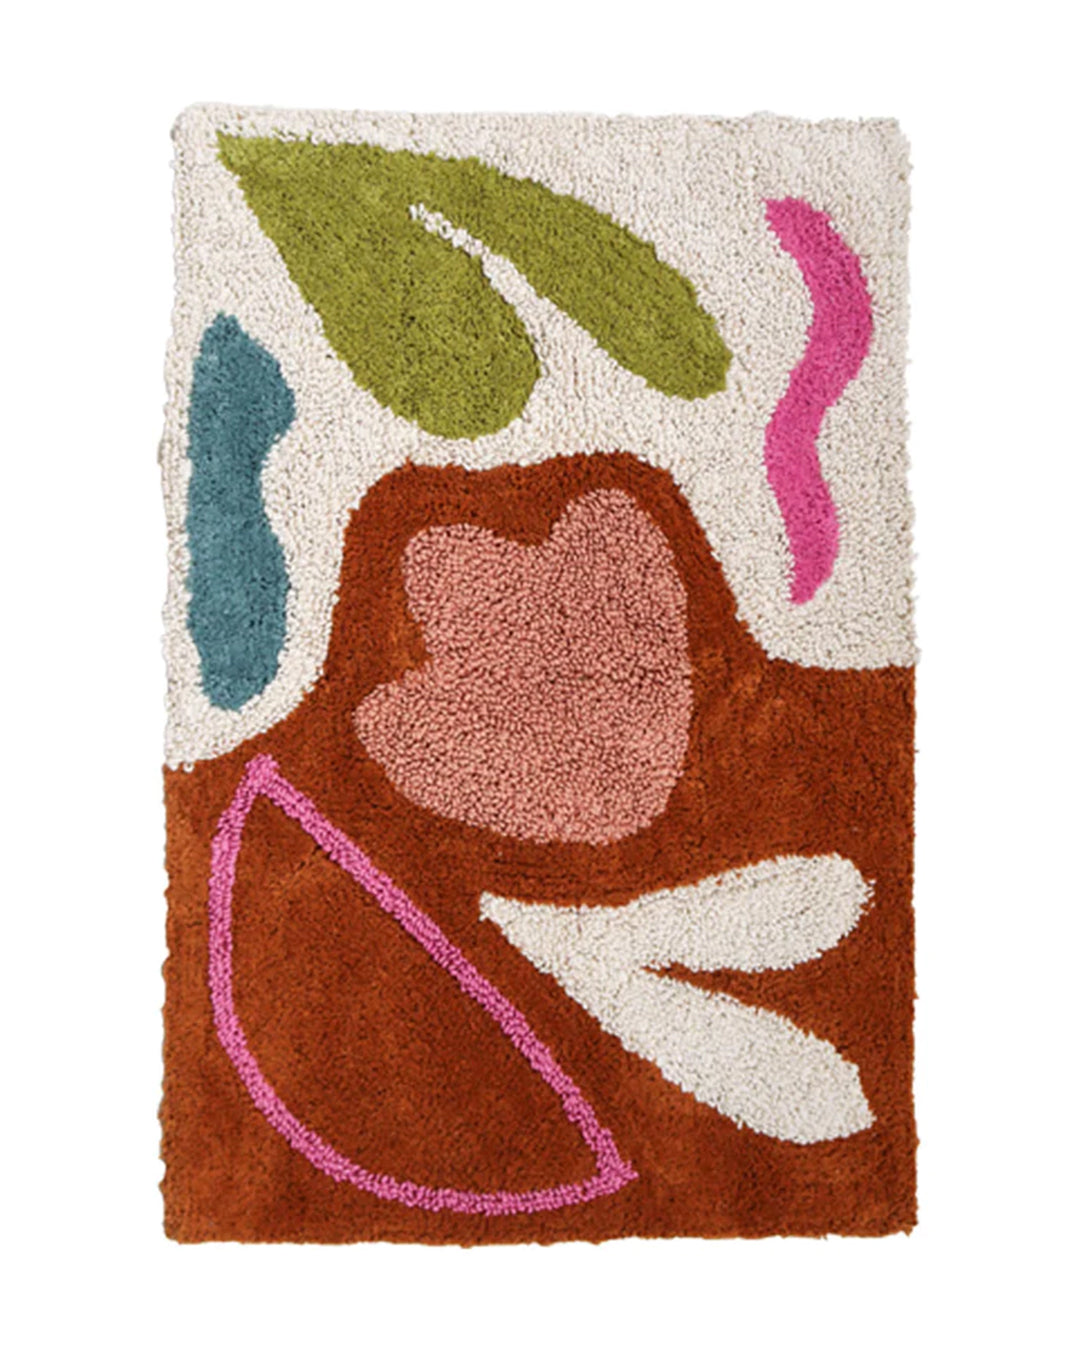 The Summer Floral Bath Mat features an abstract, modern design that hints at days spent by the seaside with the family. The mix of neutral tones and saturated hues bring a playful edge to any bathroom style.